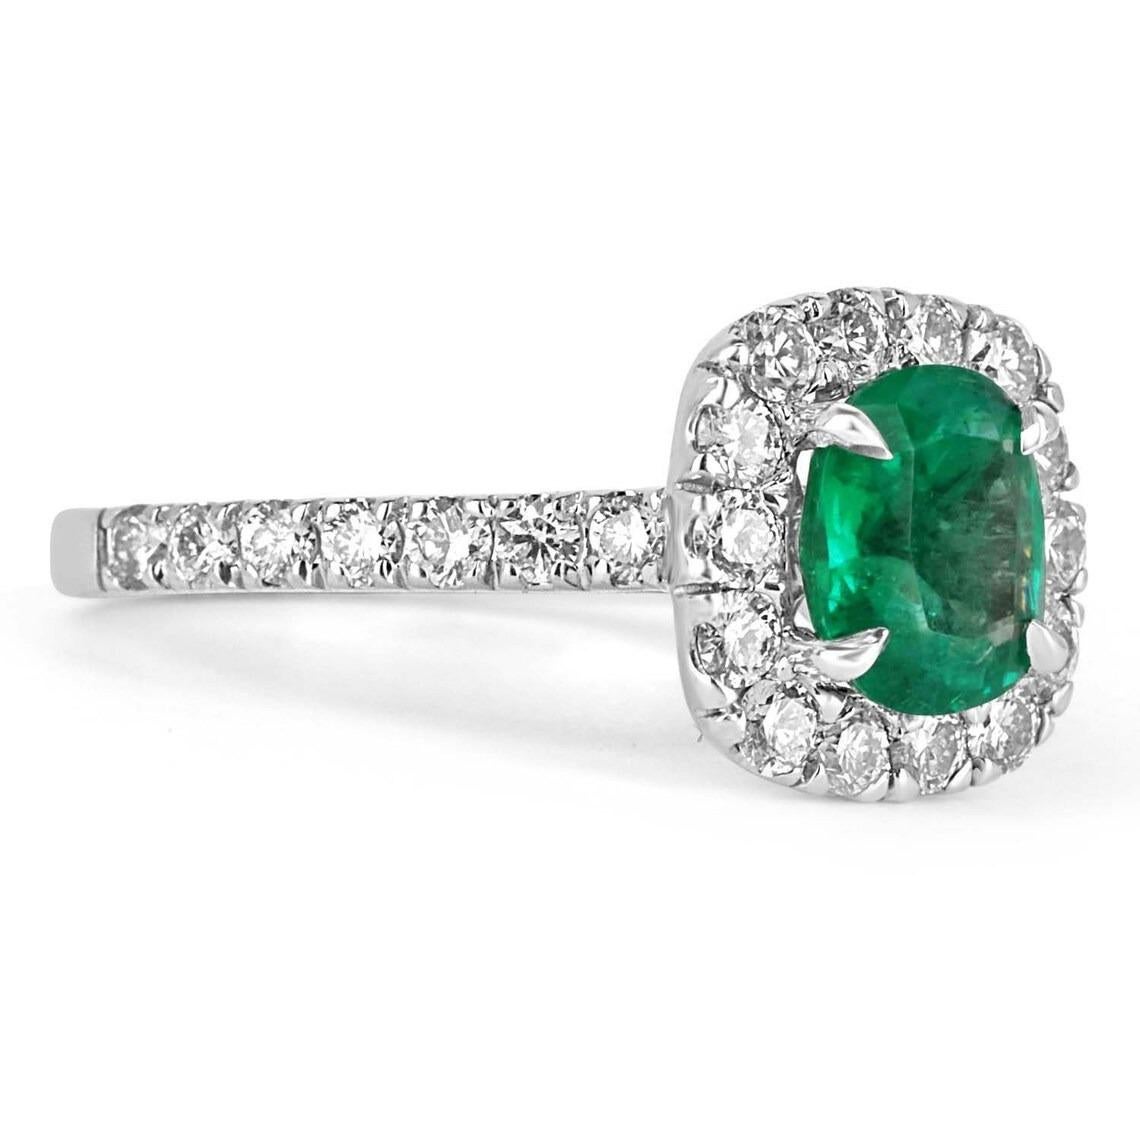 Metal Purity: 14K White Gold
Ring Setting: Halo
Gold Weight: 4.3 grams

Main Stone: Emerald
Shape: Cushion Cut
Weight: 1.33-carats
Clarity: Very Good
Color: Green
Luster: Very Good
Origin: Colombia
Treatments: Natural

Secondary Stone: